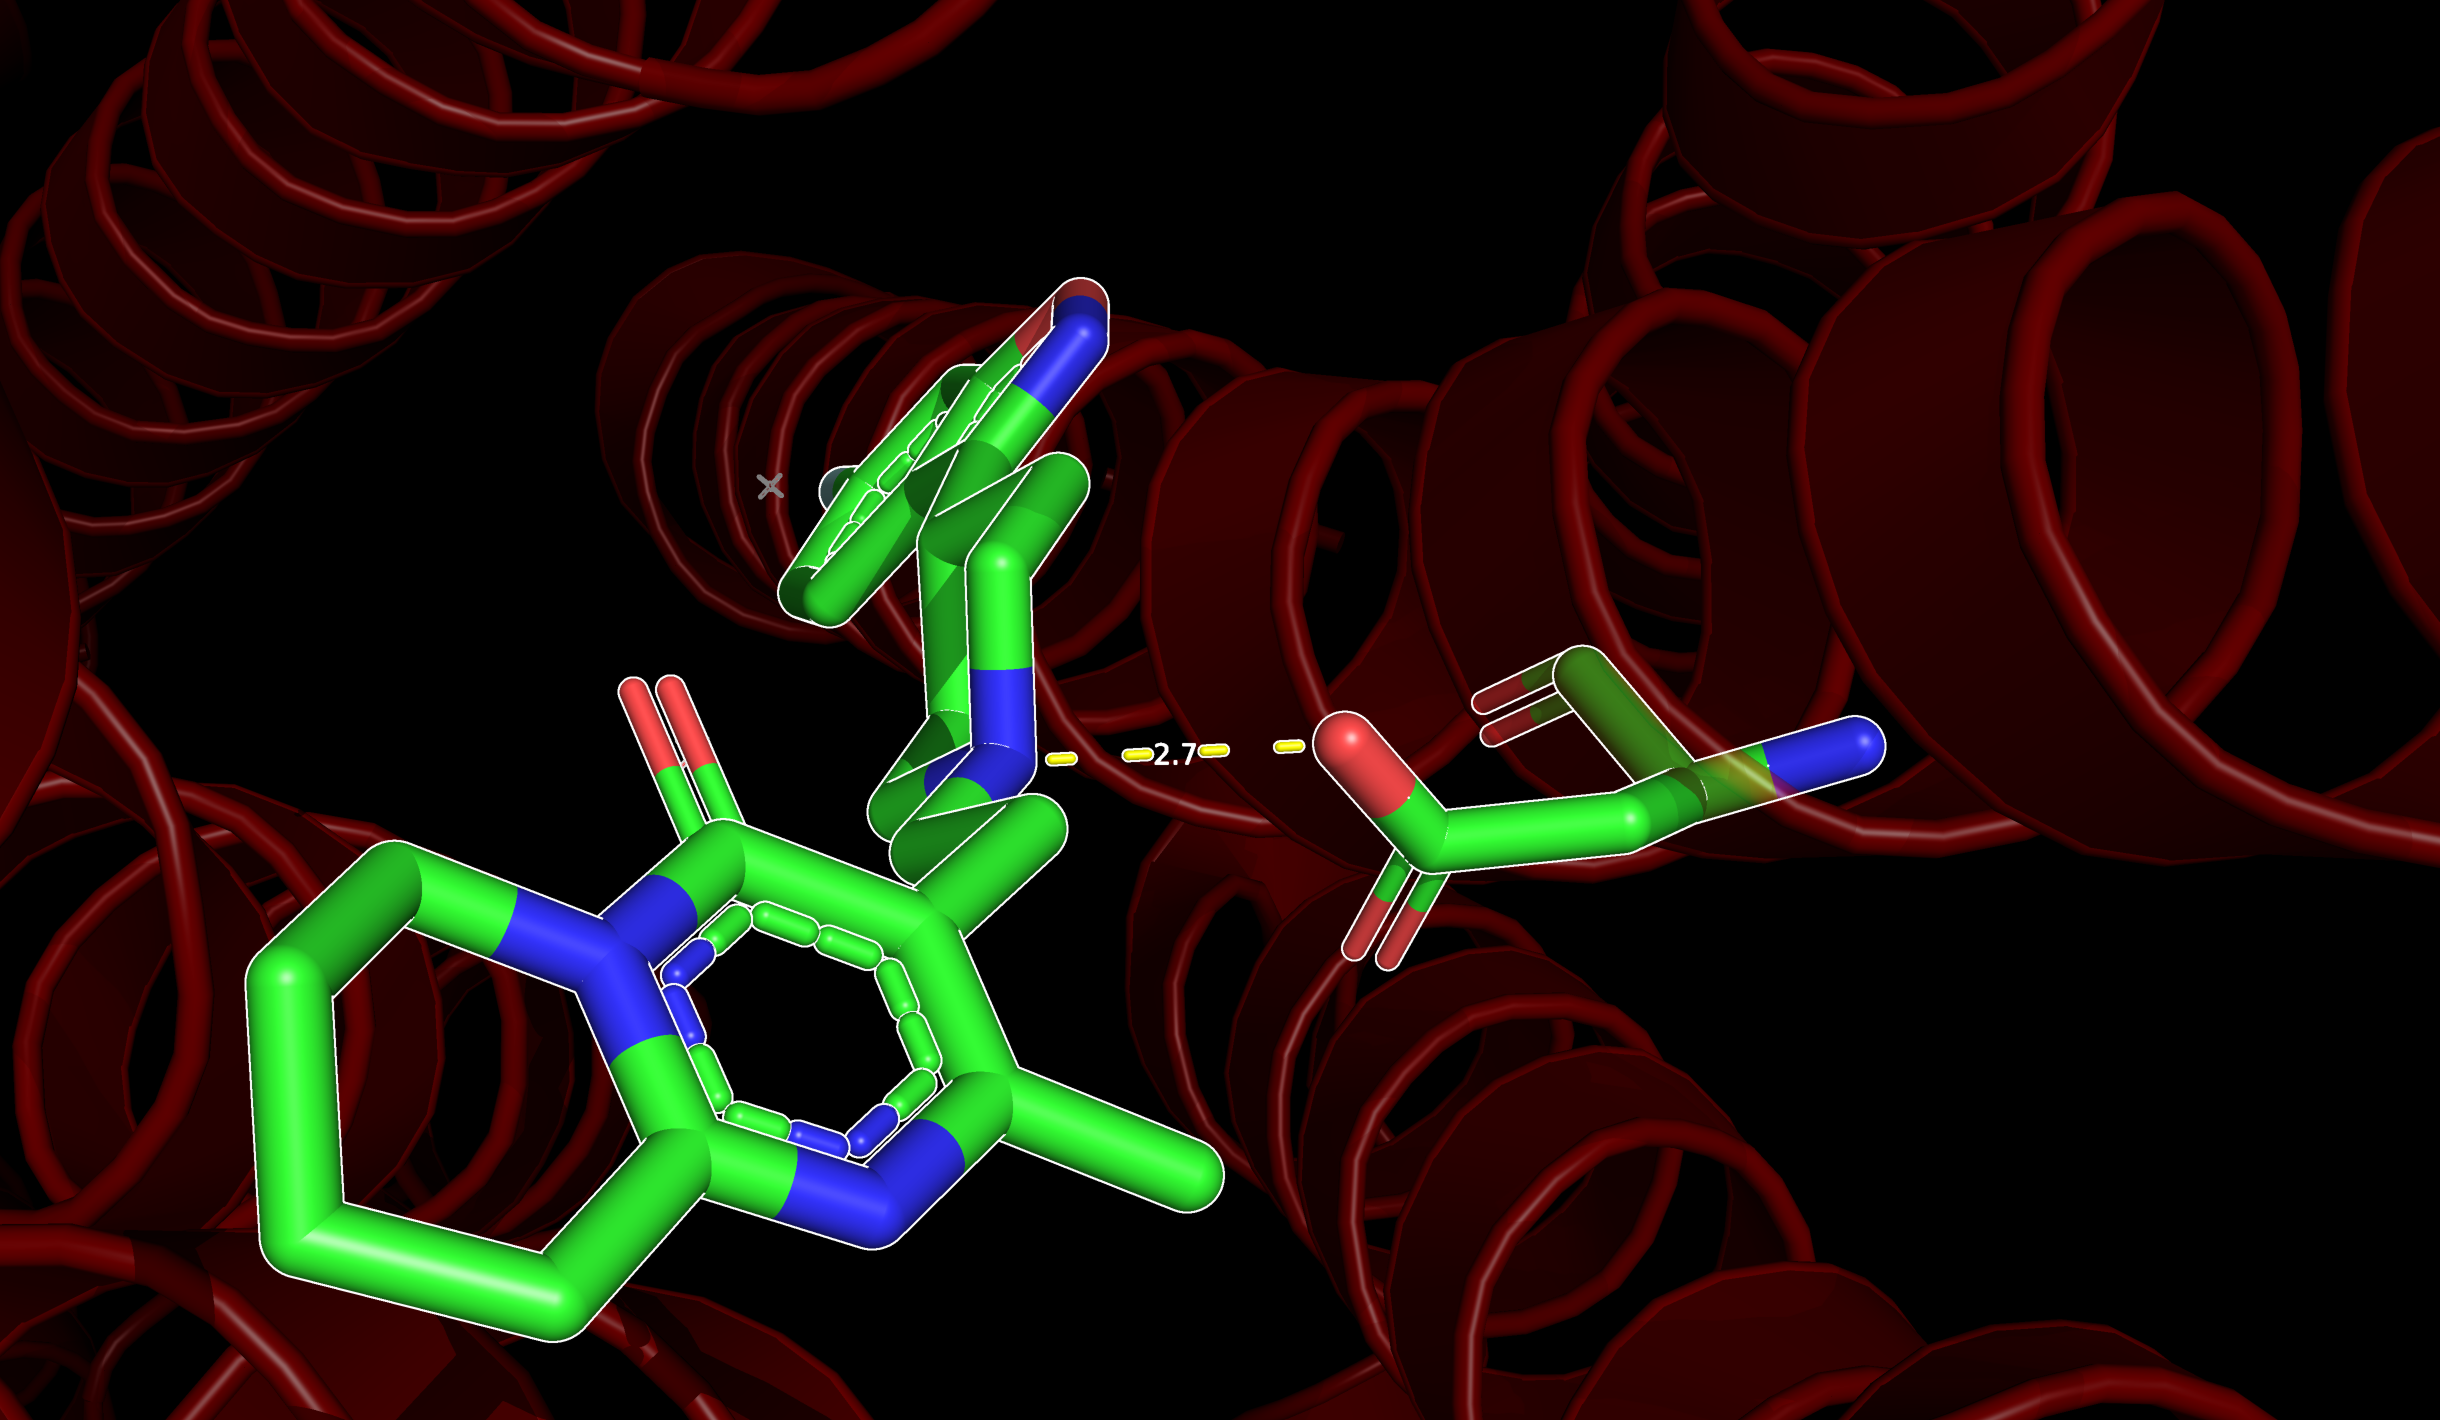 Hydrogen bonds and polar interactions displayed in PyMOL.